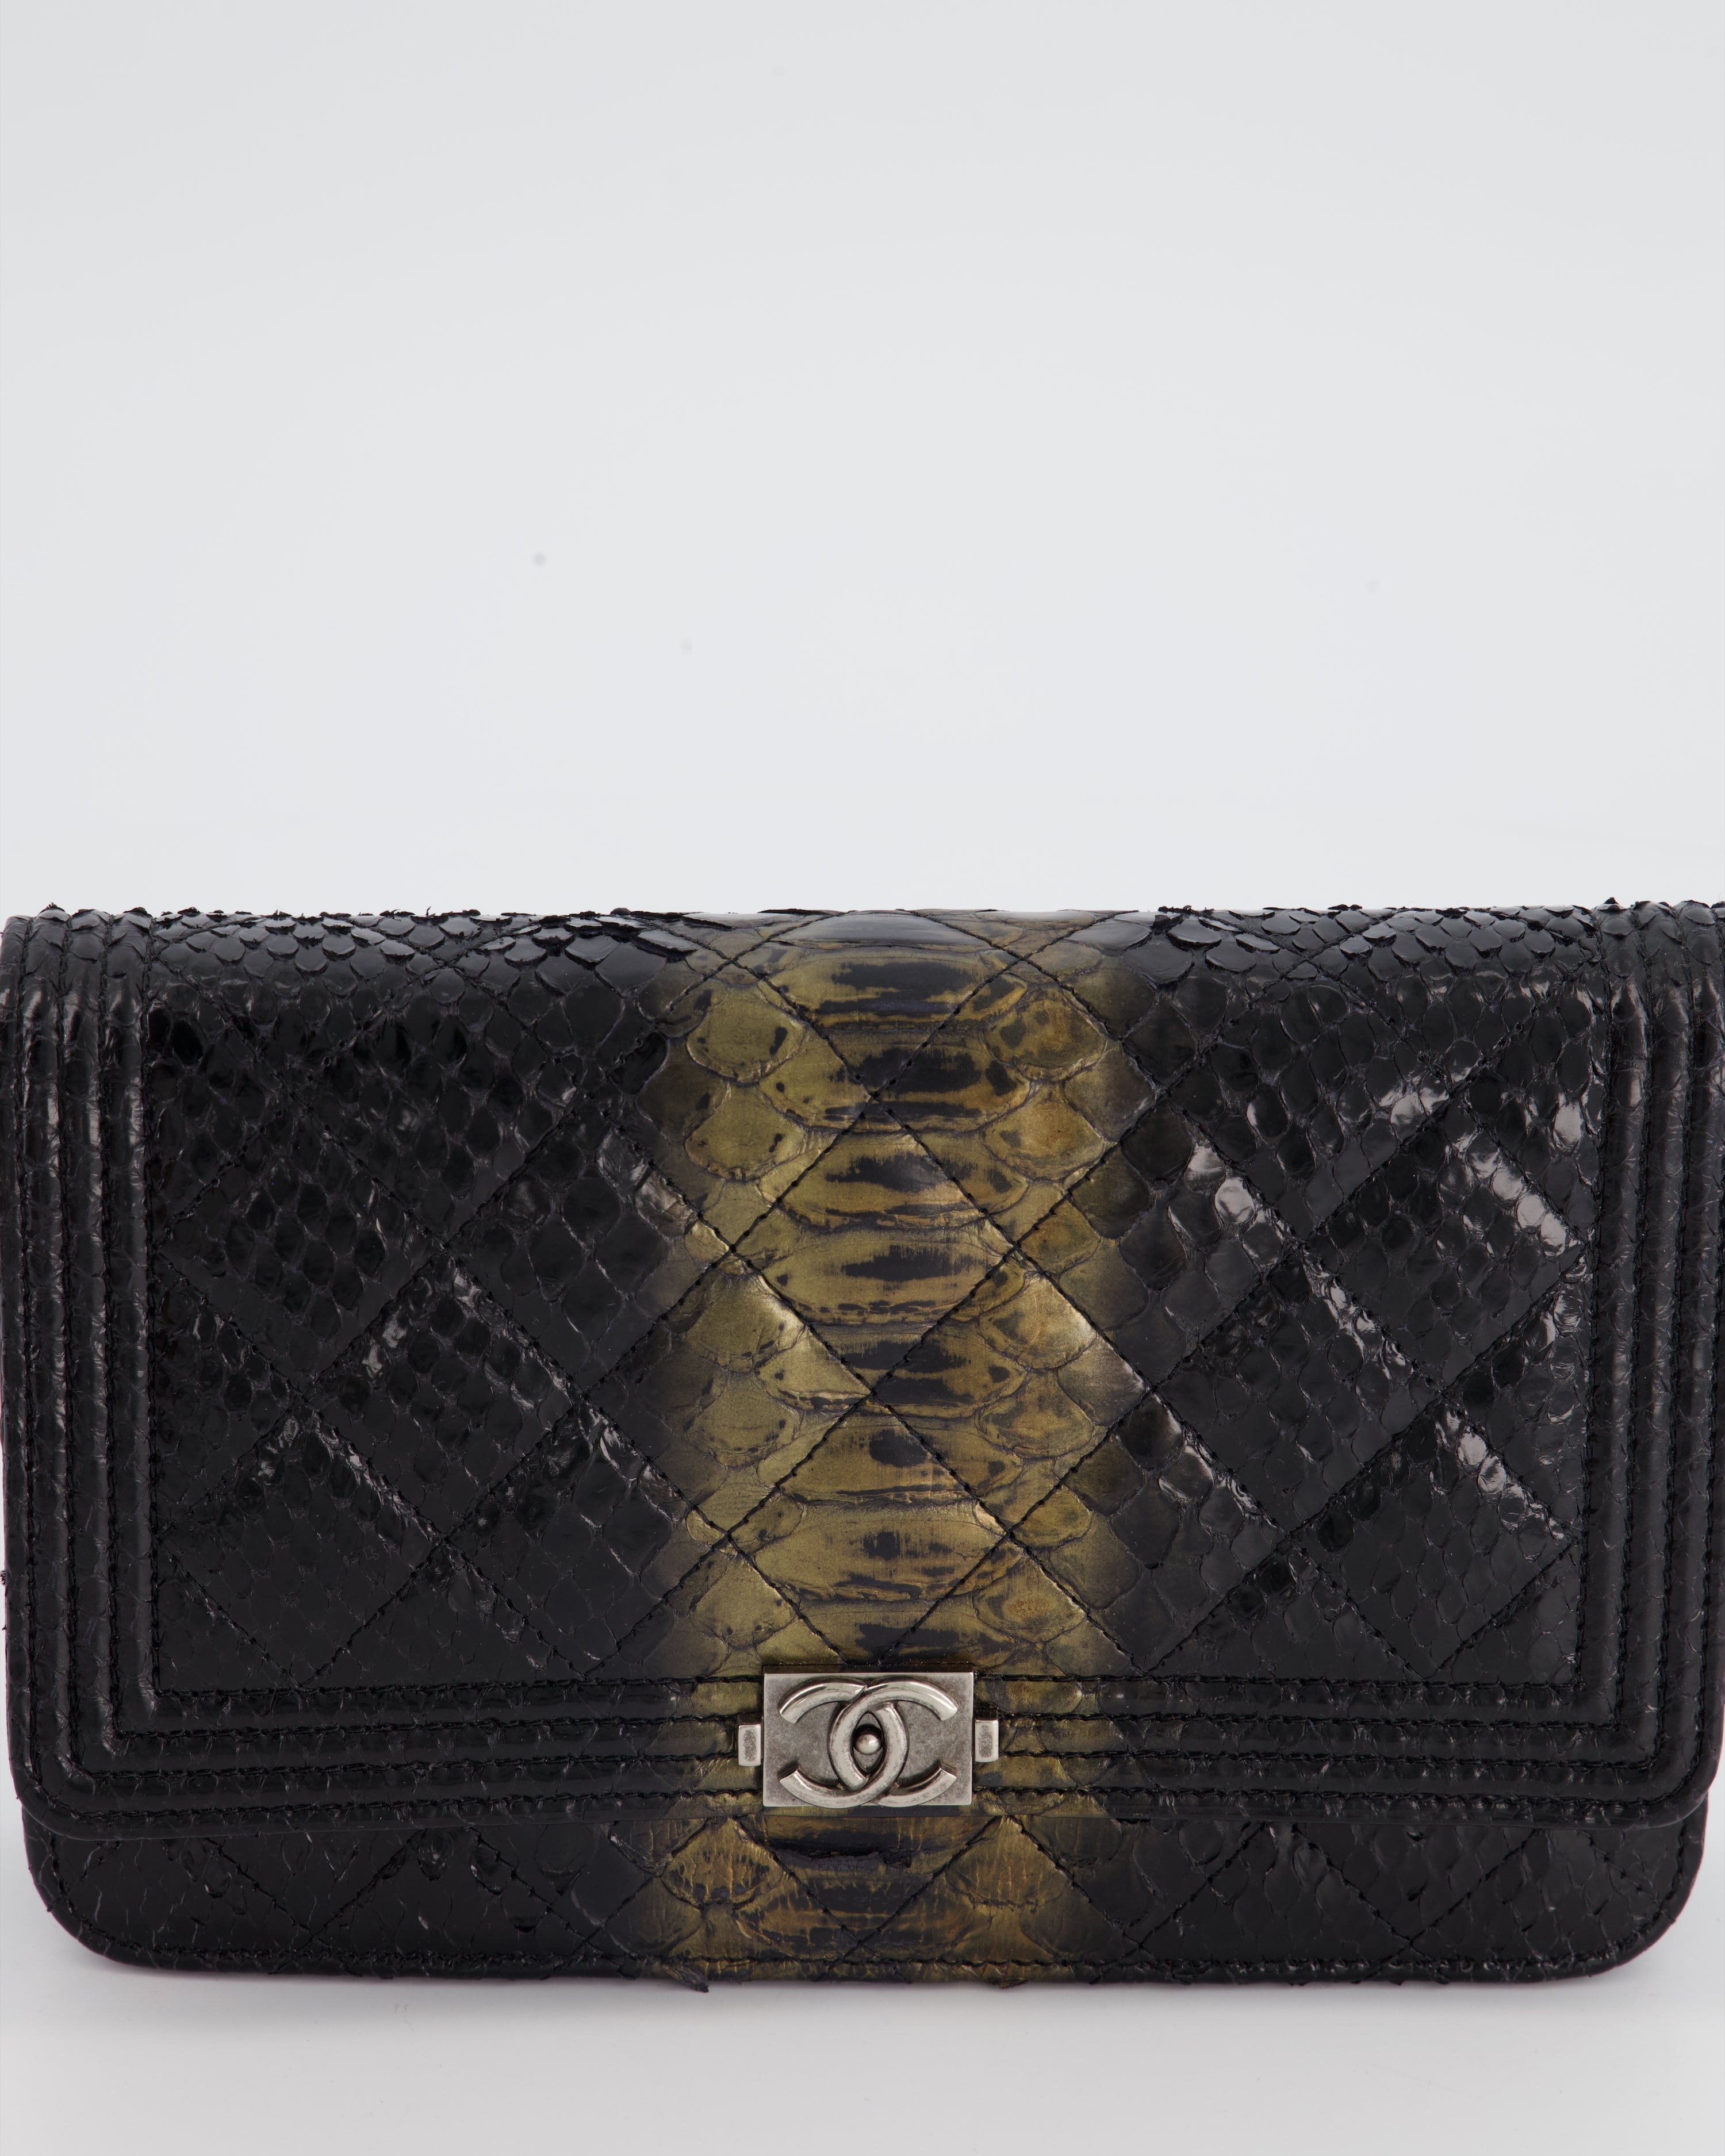 Chanel Black and Gold Wallet on Chain Bag in Python with Ruthenium Hardware